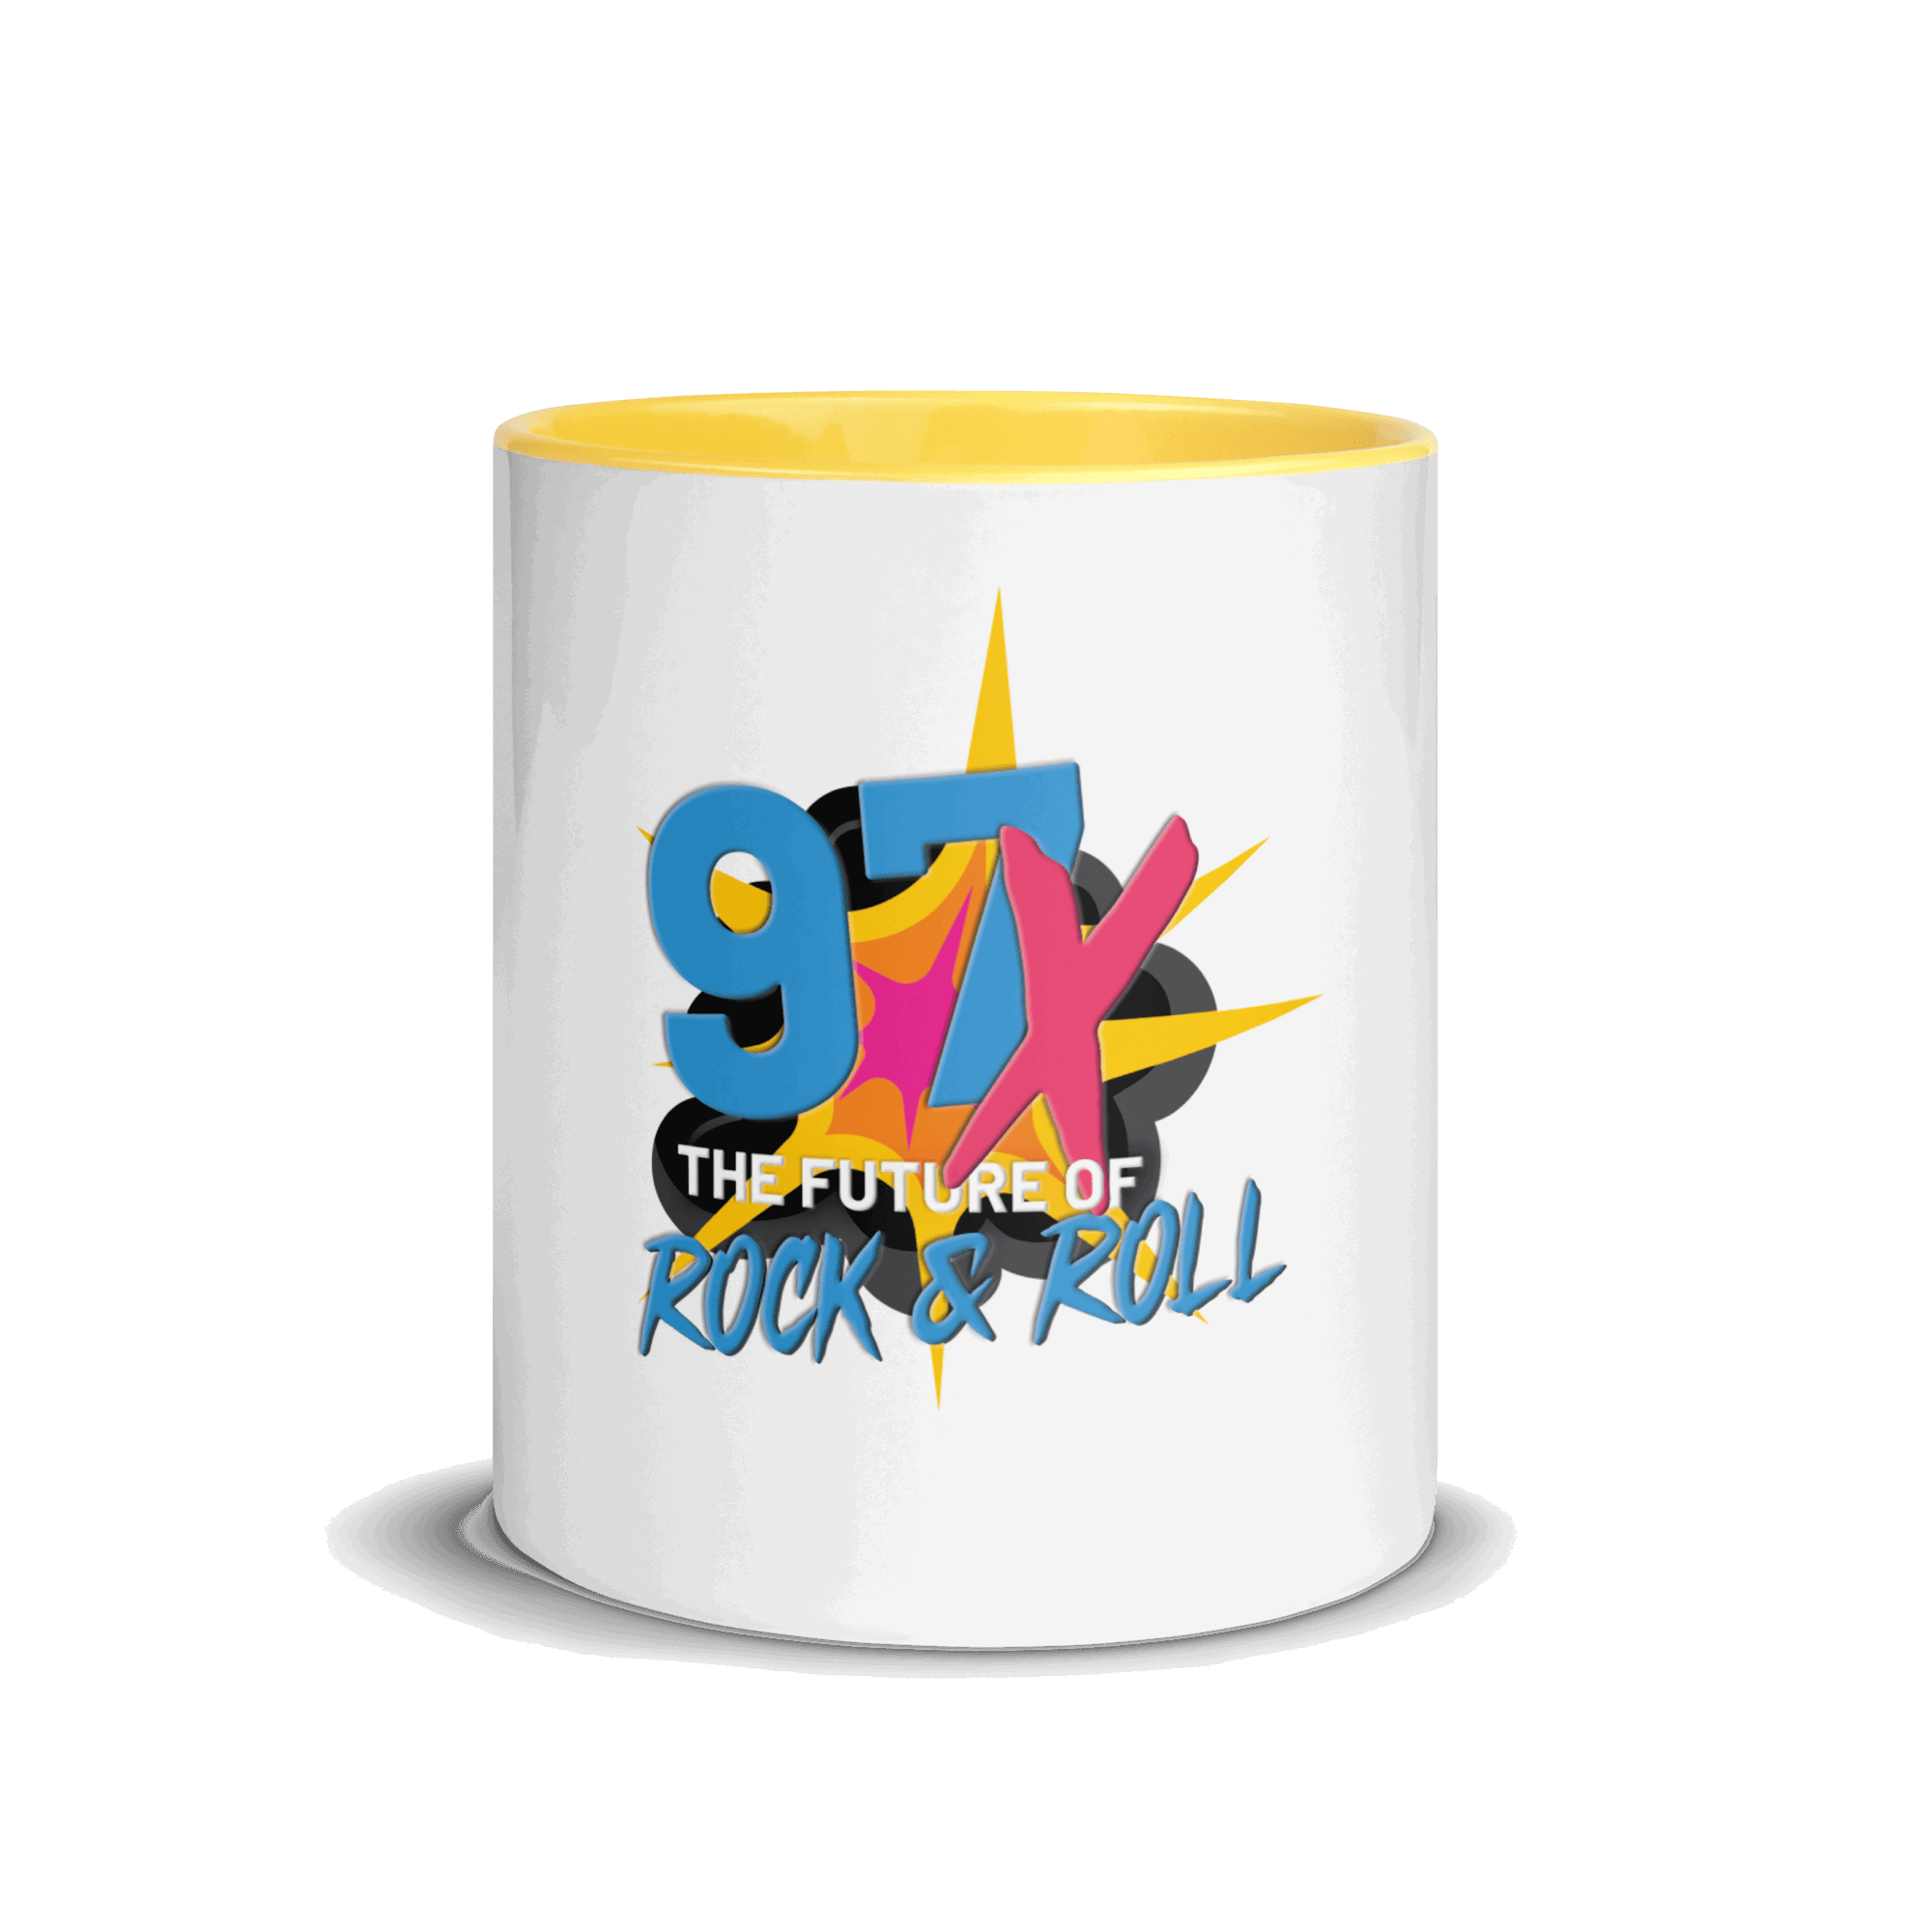 97x The Future Of Rock n Roll Mug with Color Inside VAWDesigns